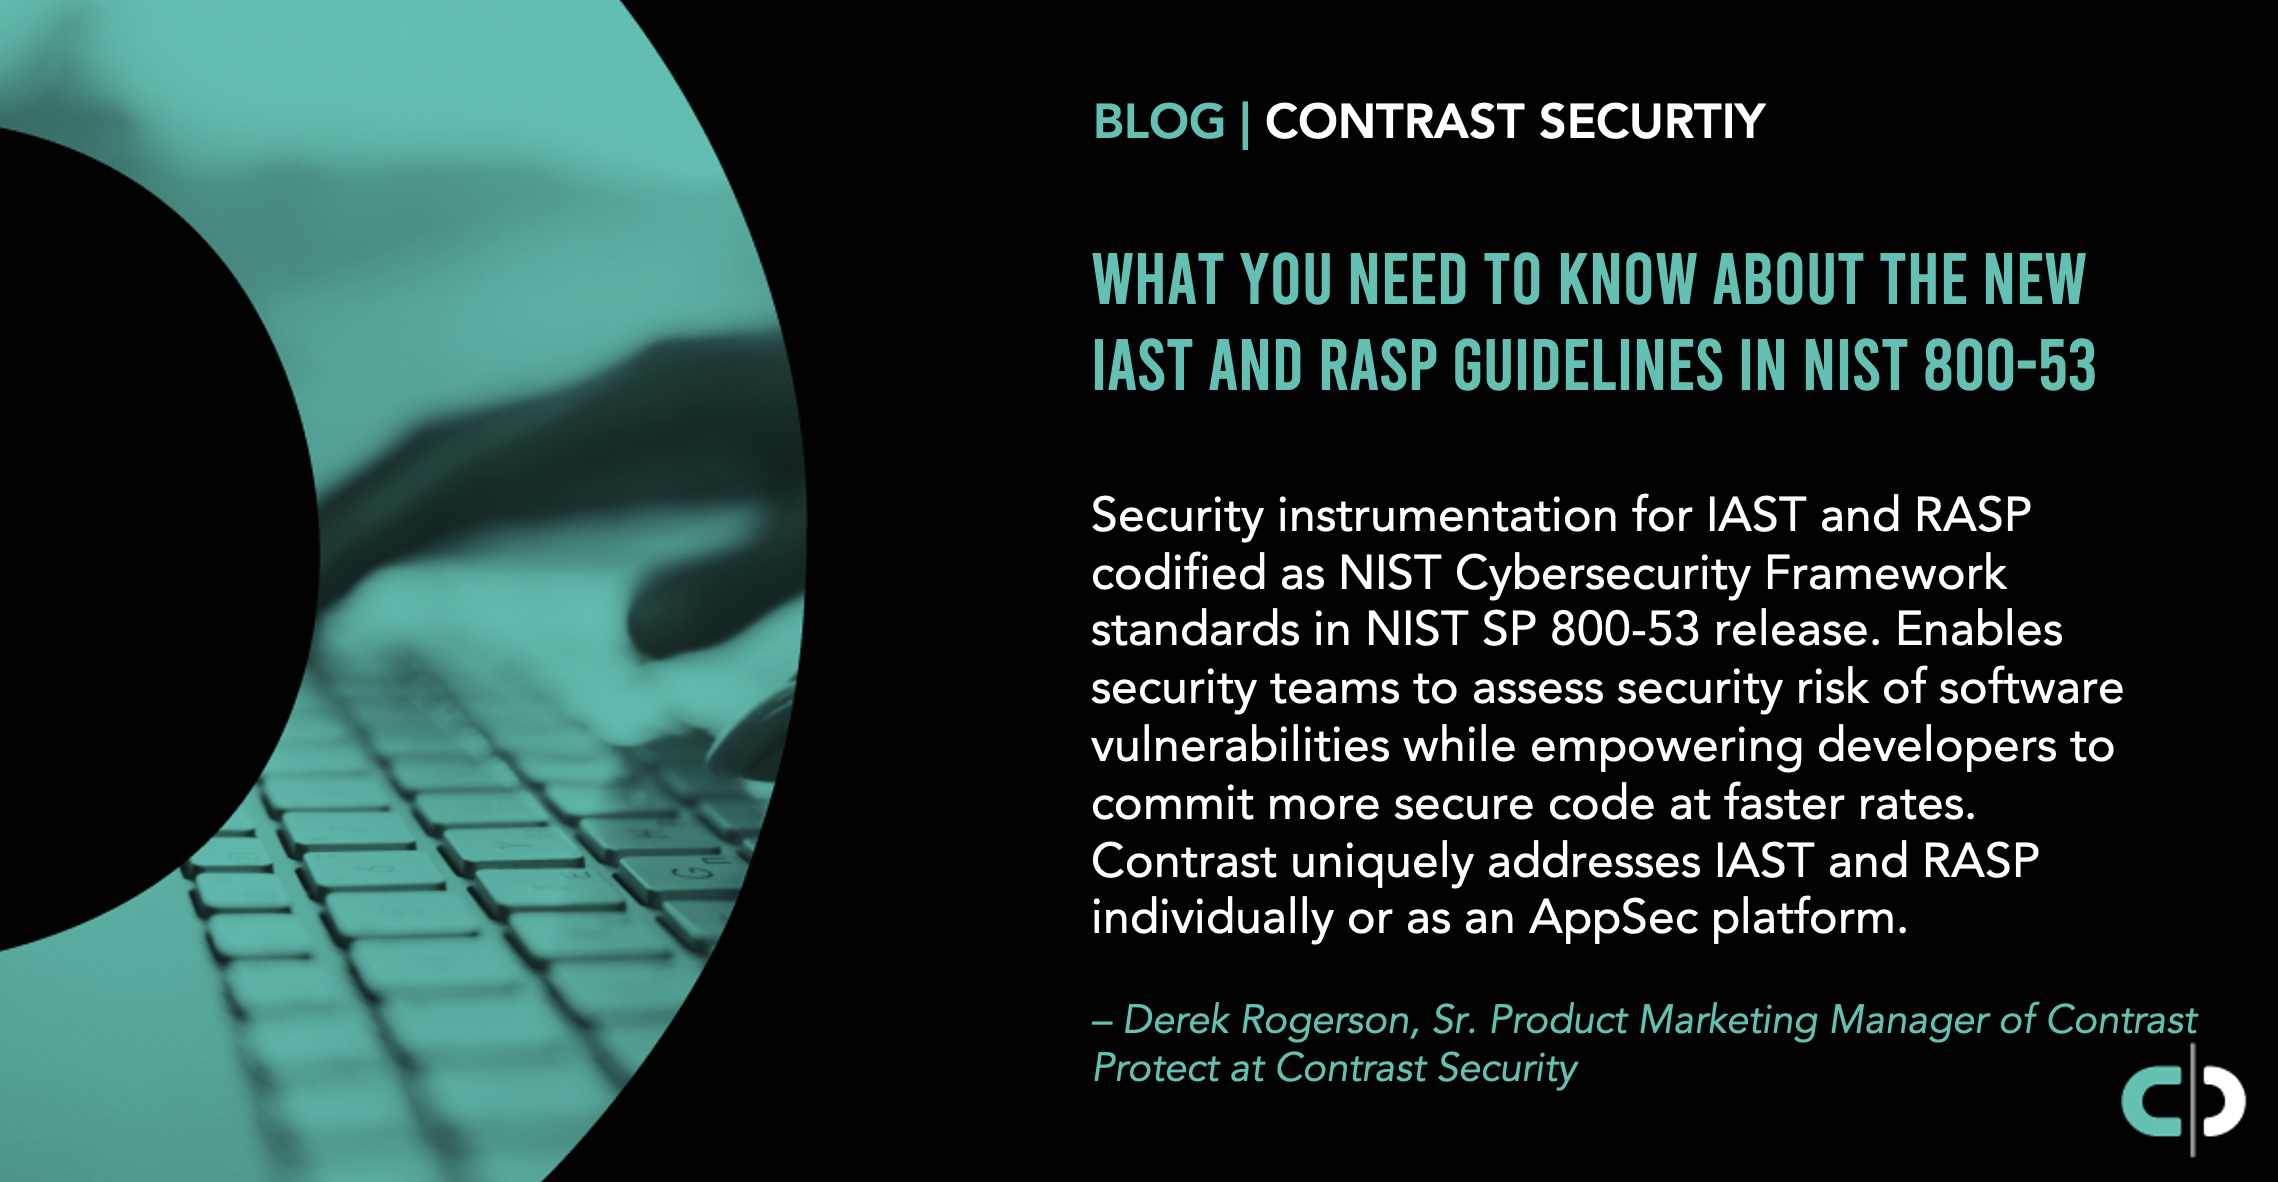 March 19, 2020_WHAT YOU NEED TO KNOW ABOUT THE NEW IAST AND RASP GUIDELINES IN NIST 800-53-2